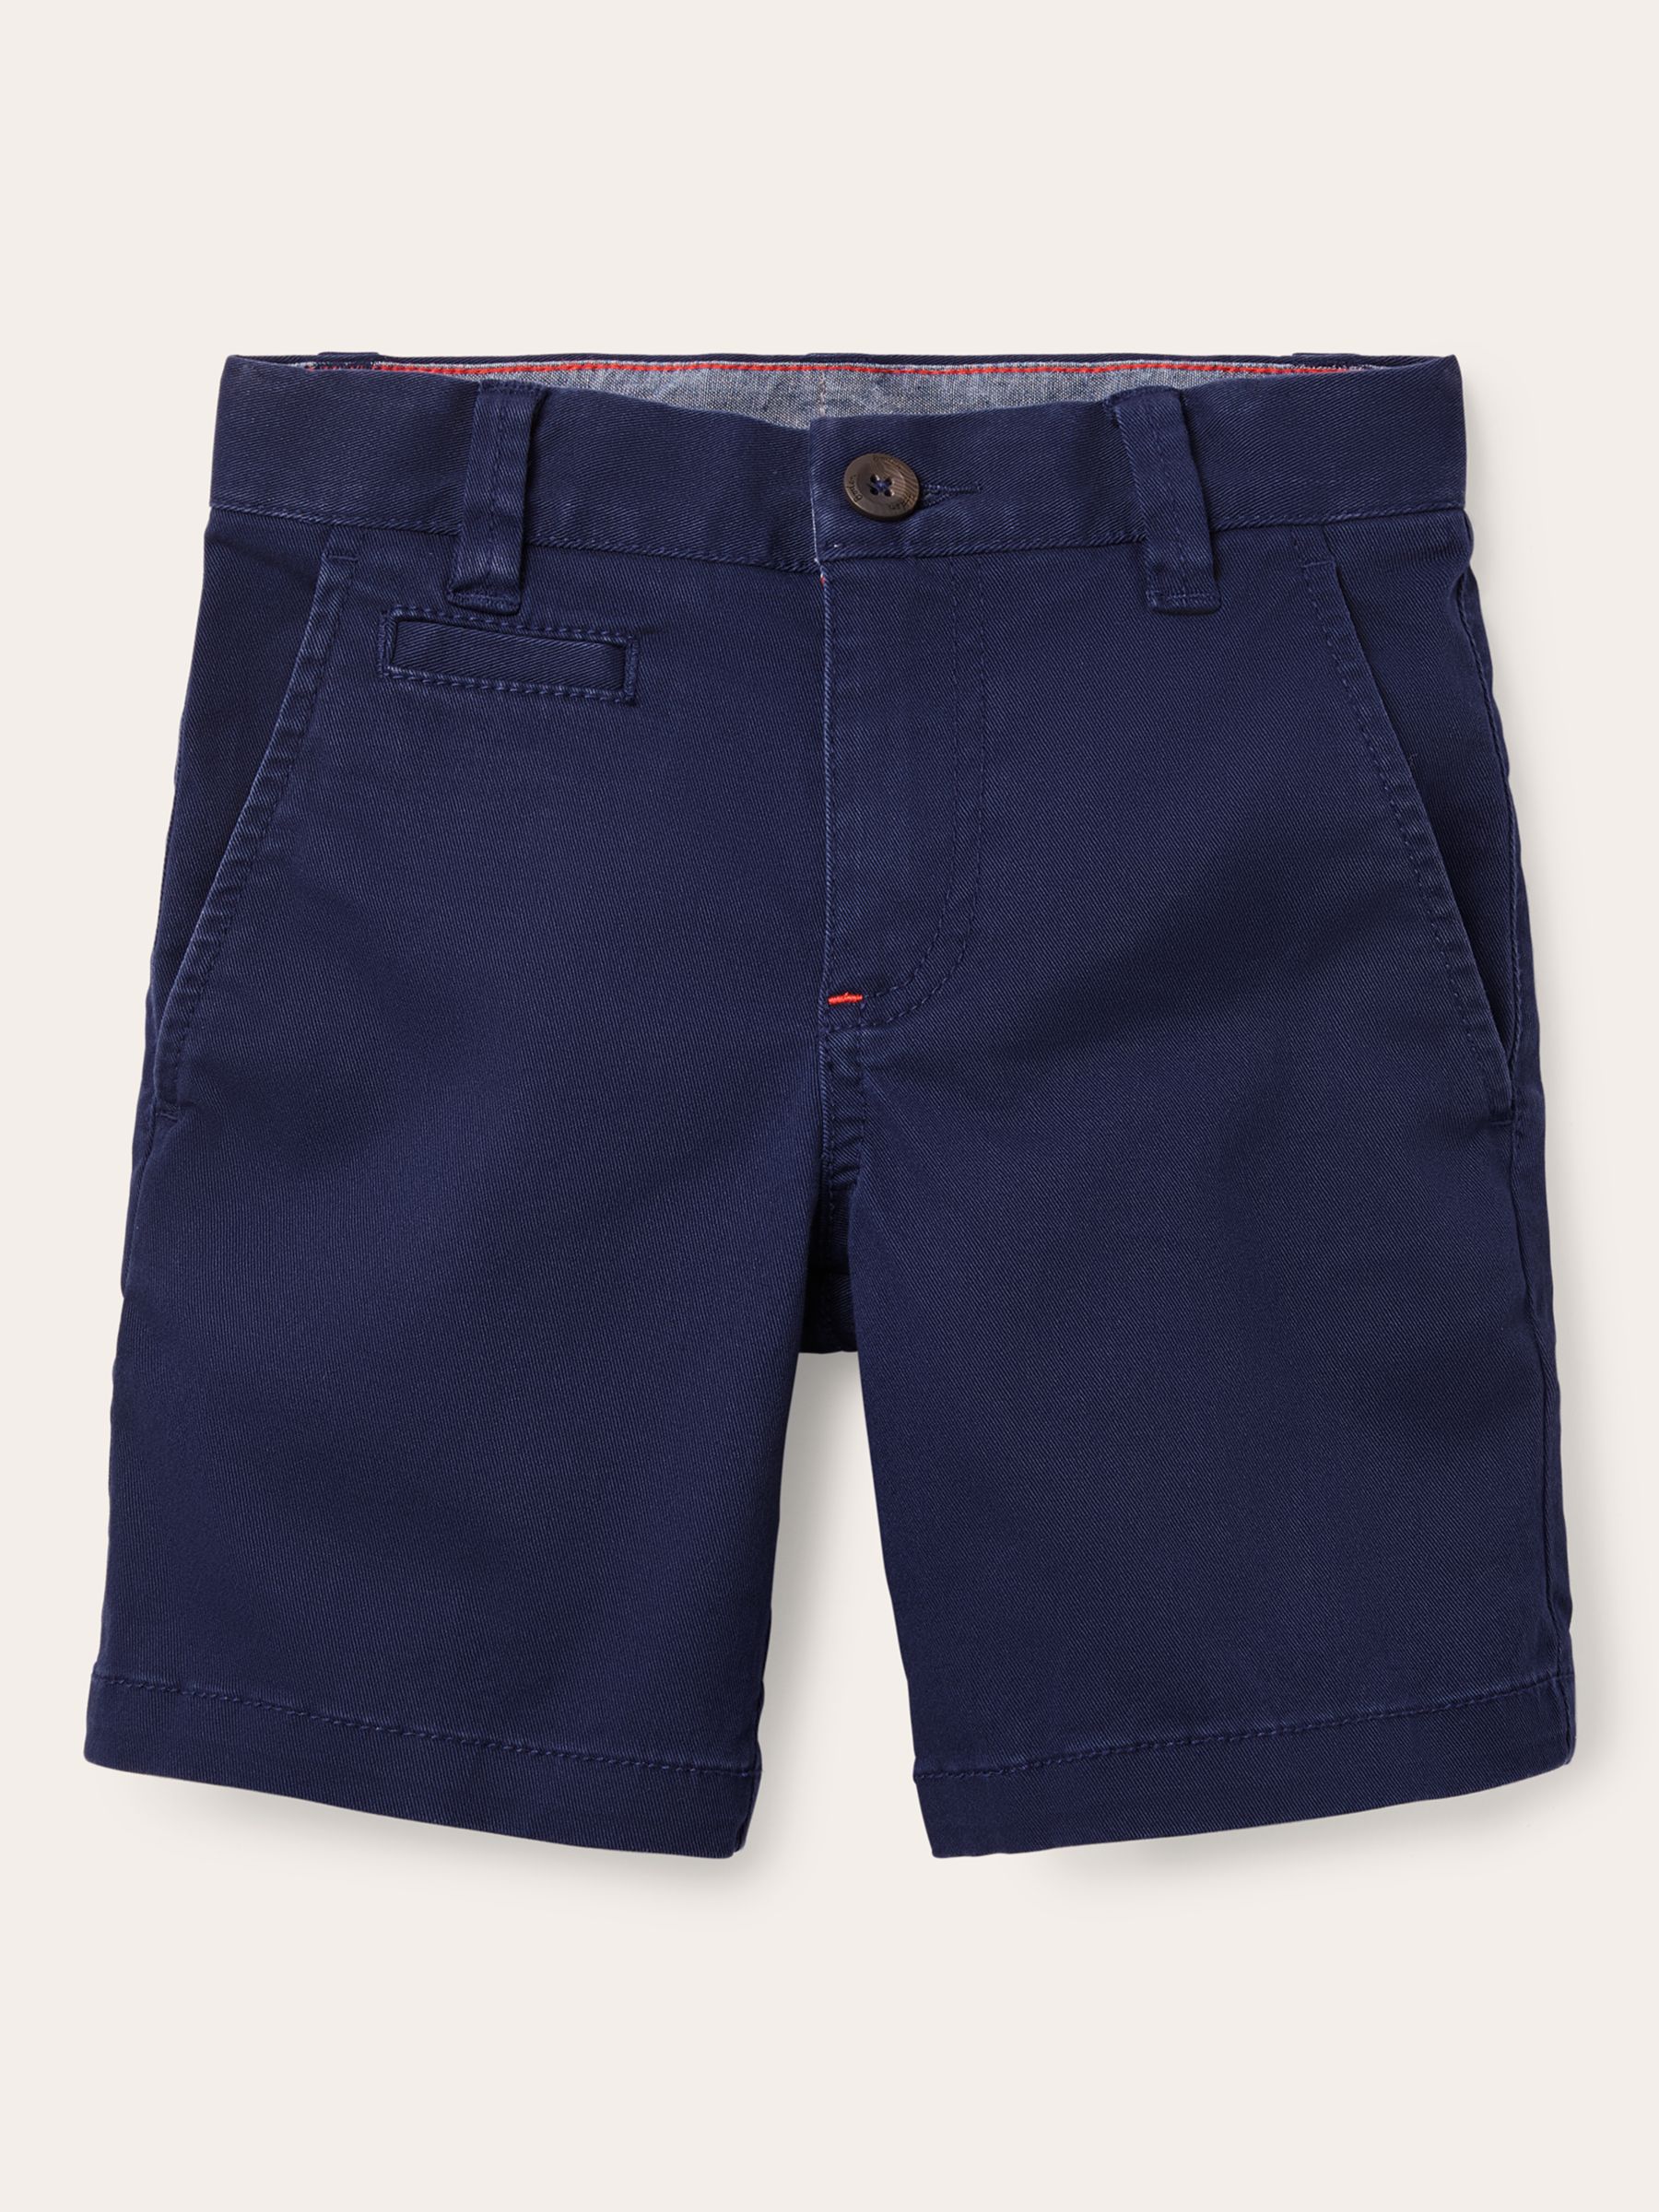 Boden Chino | vlr.eng.br